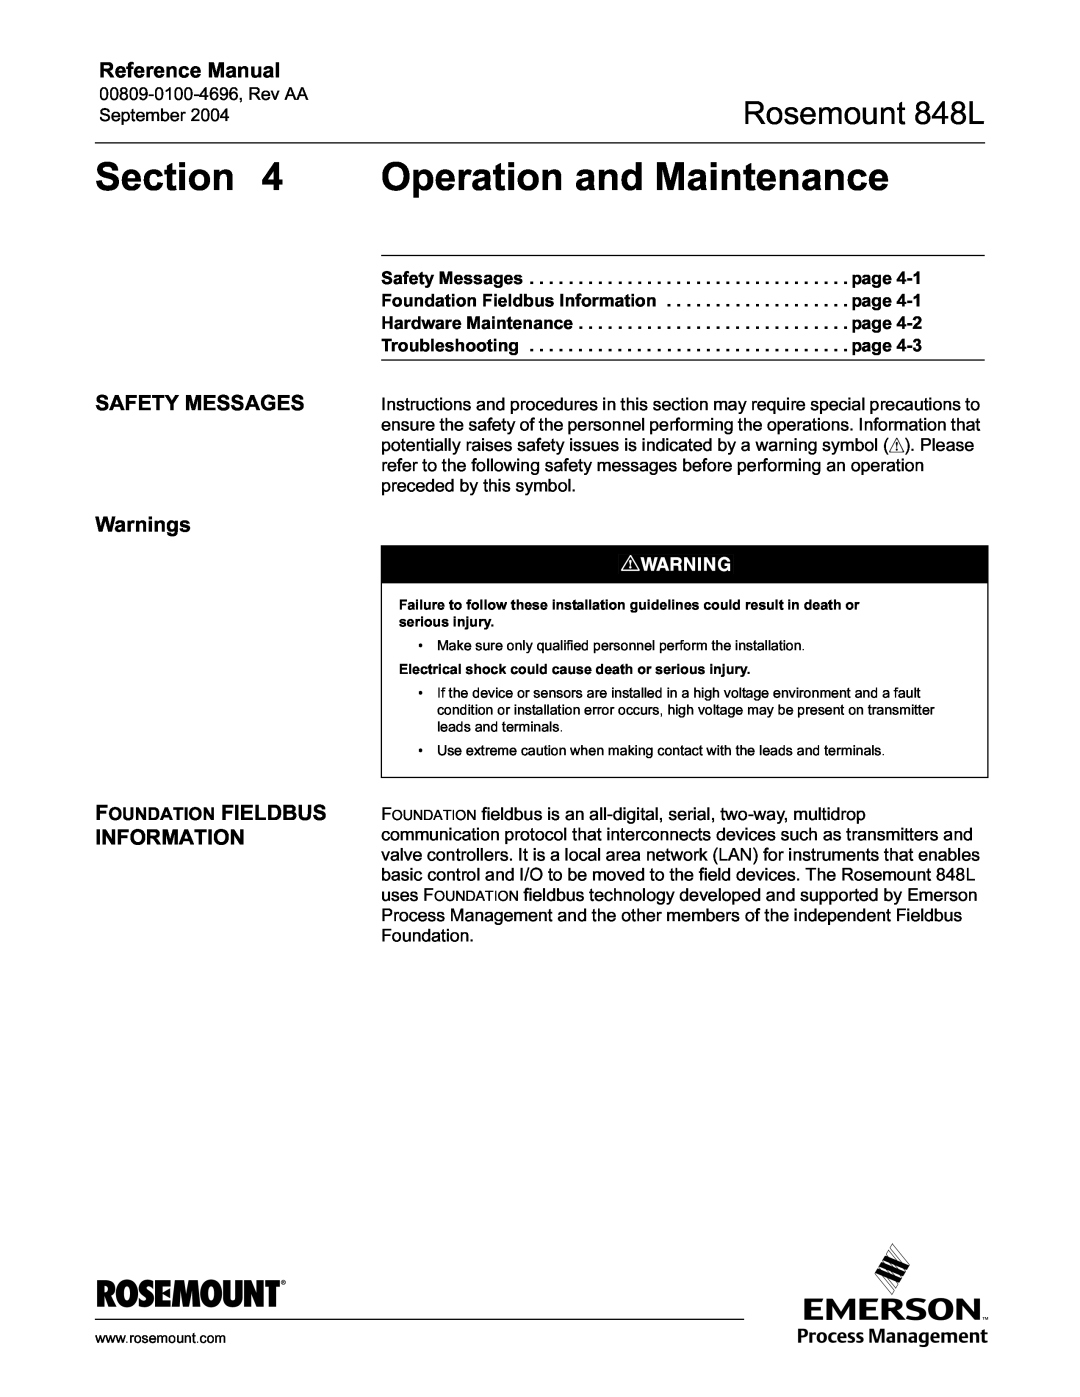 Emerson manual Operation and Maintenance, Foundation Fieldbus Information, Rosemount 848L, Reference Manual 